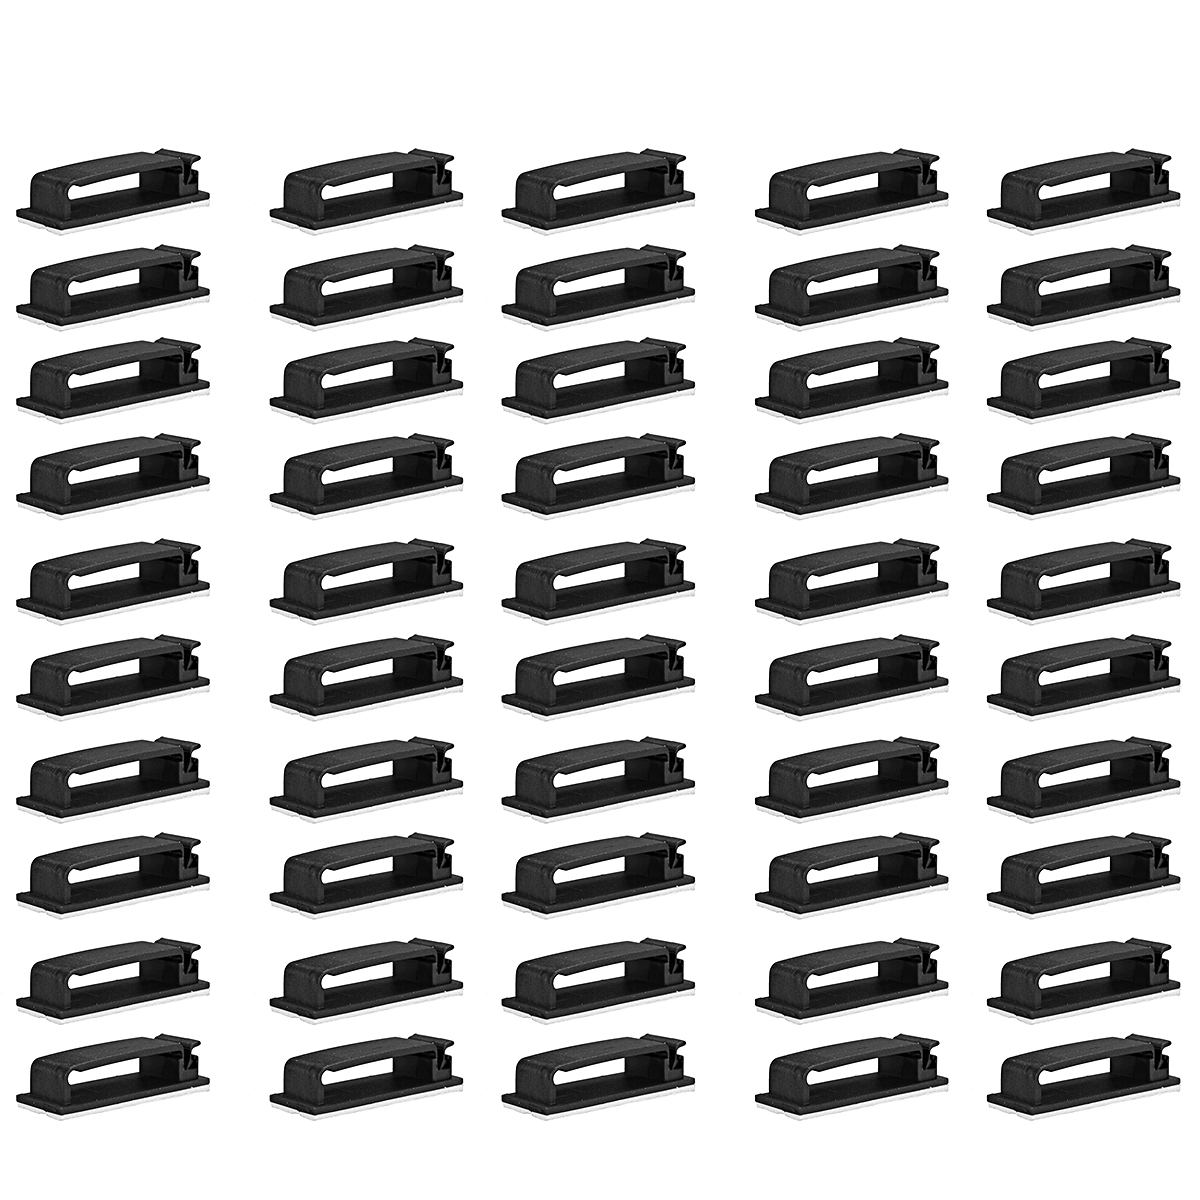 50Pcs-Cable-Clips-Self-Adhesive-Cord-Management-Wire-Holder-Organizer-Clamp-for-Computer-1935352-2